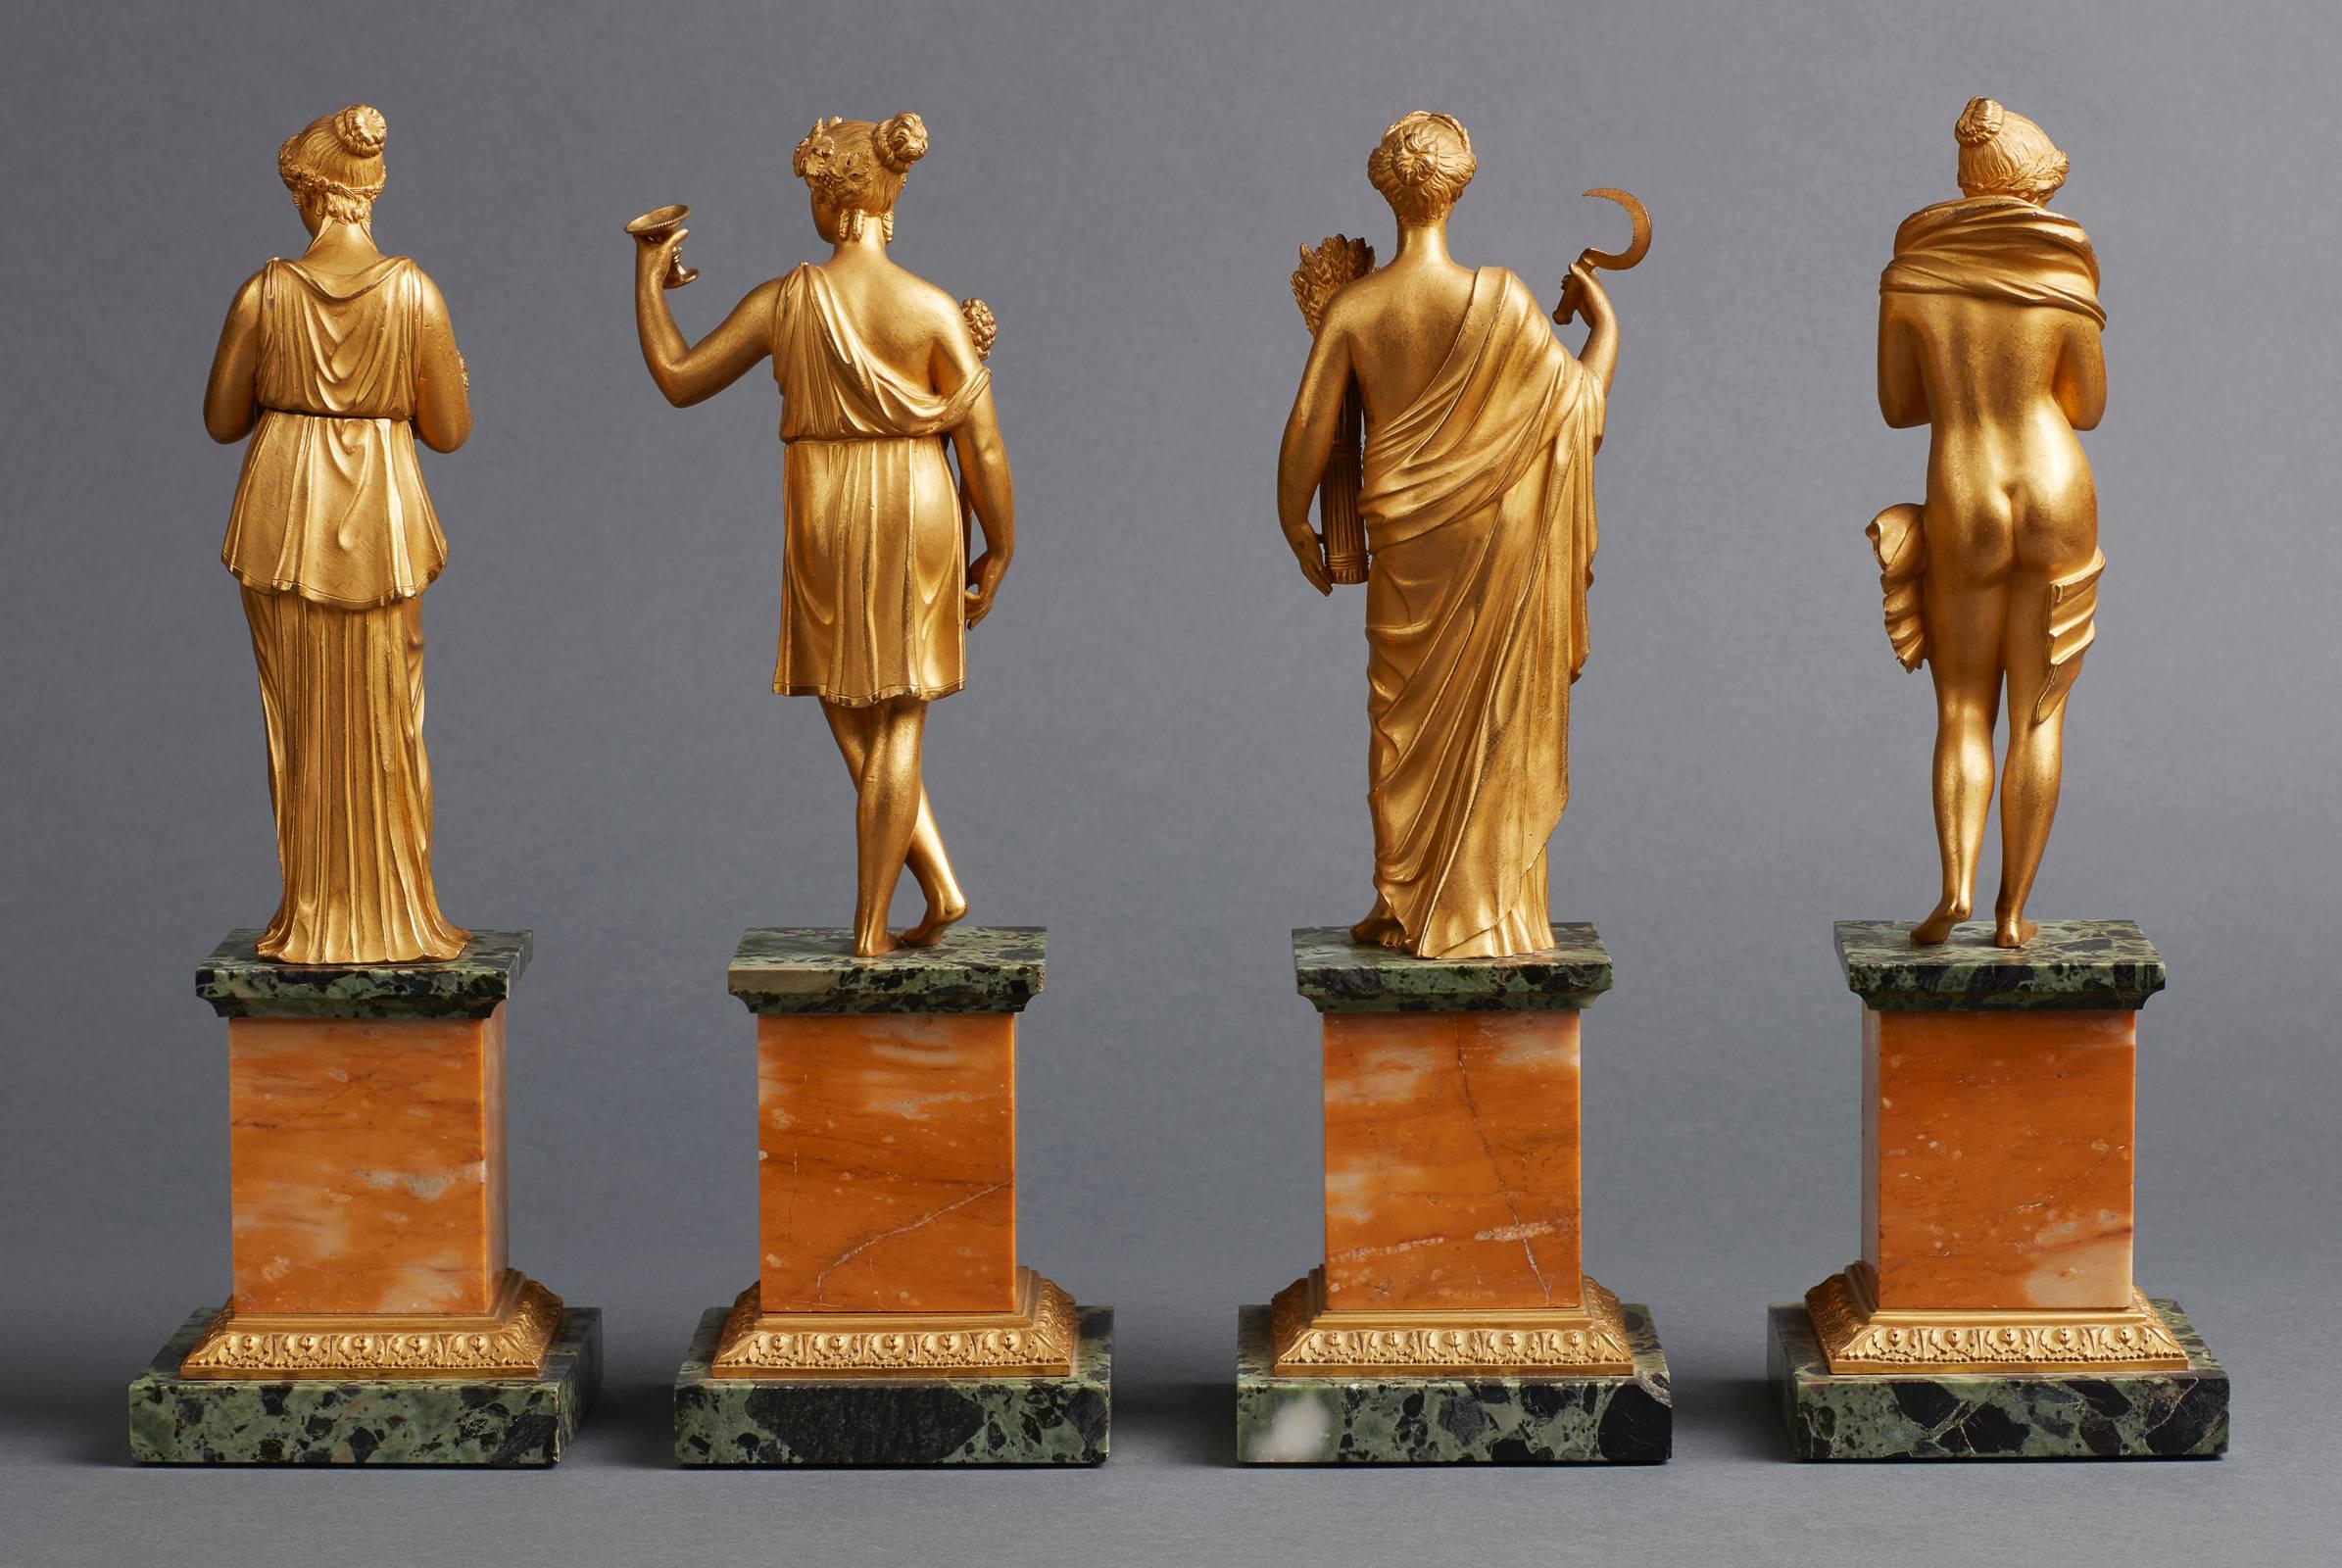 A rare and very decorative set of four gilt bronze figurines of ancient goddesses emblematic of the four seasons. Each figure standing on a square pedestal made of green and yellow marble with a central ormolu floral ornament and an accanthus leave